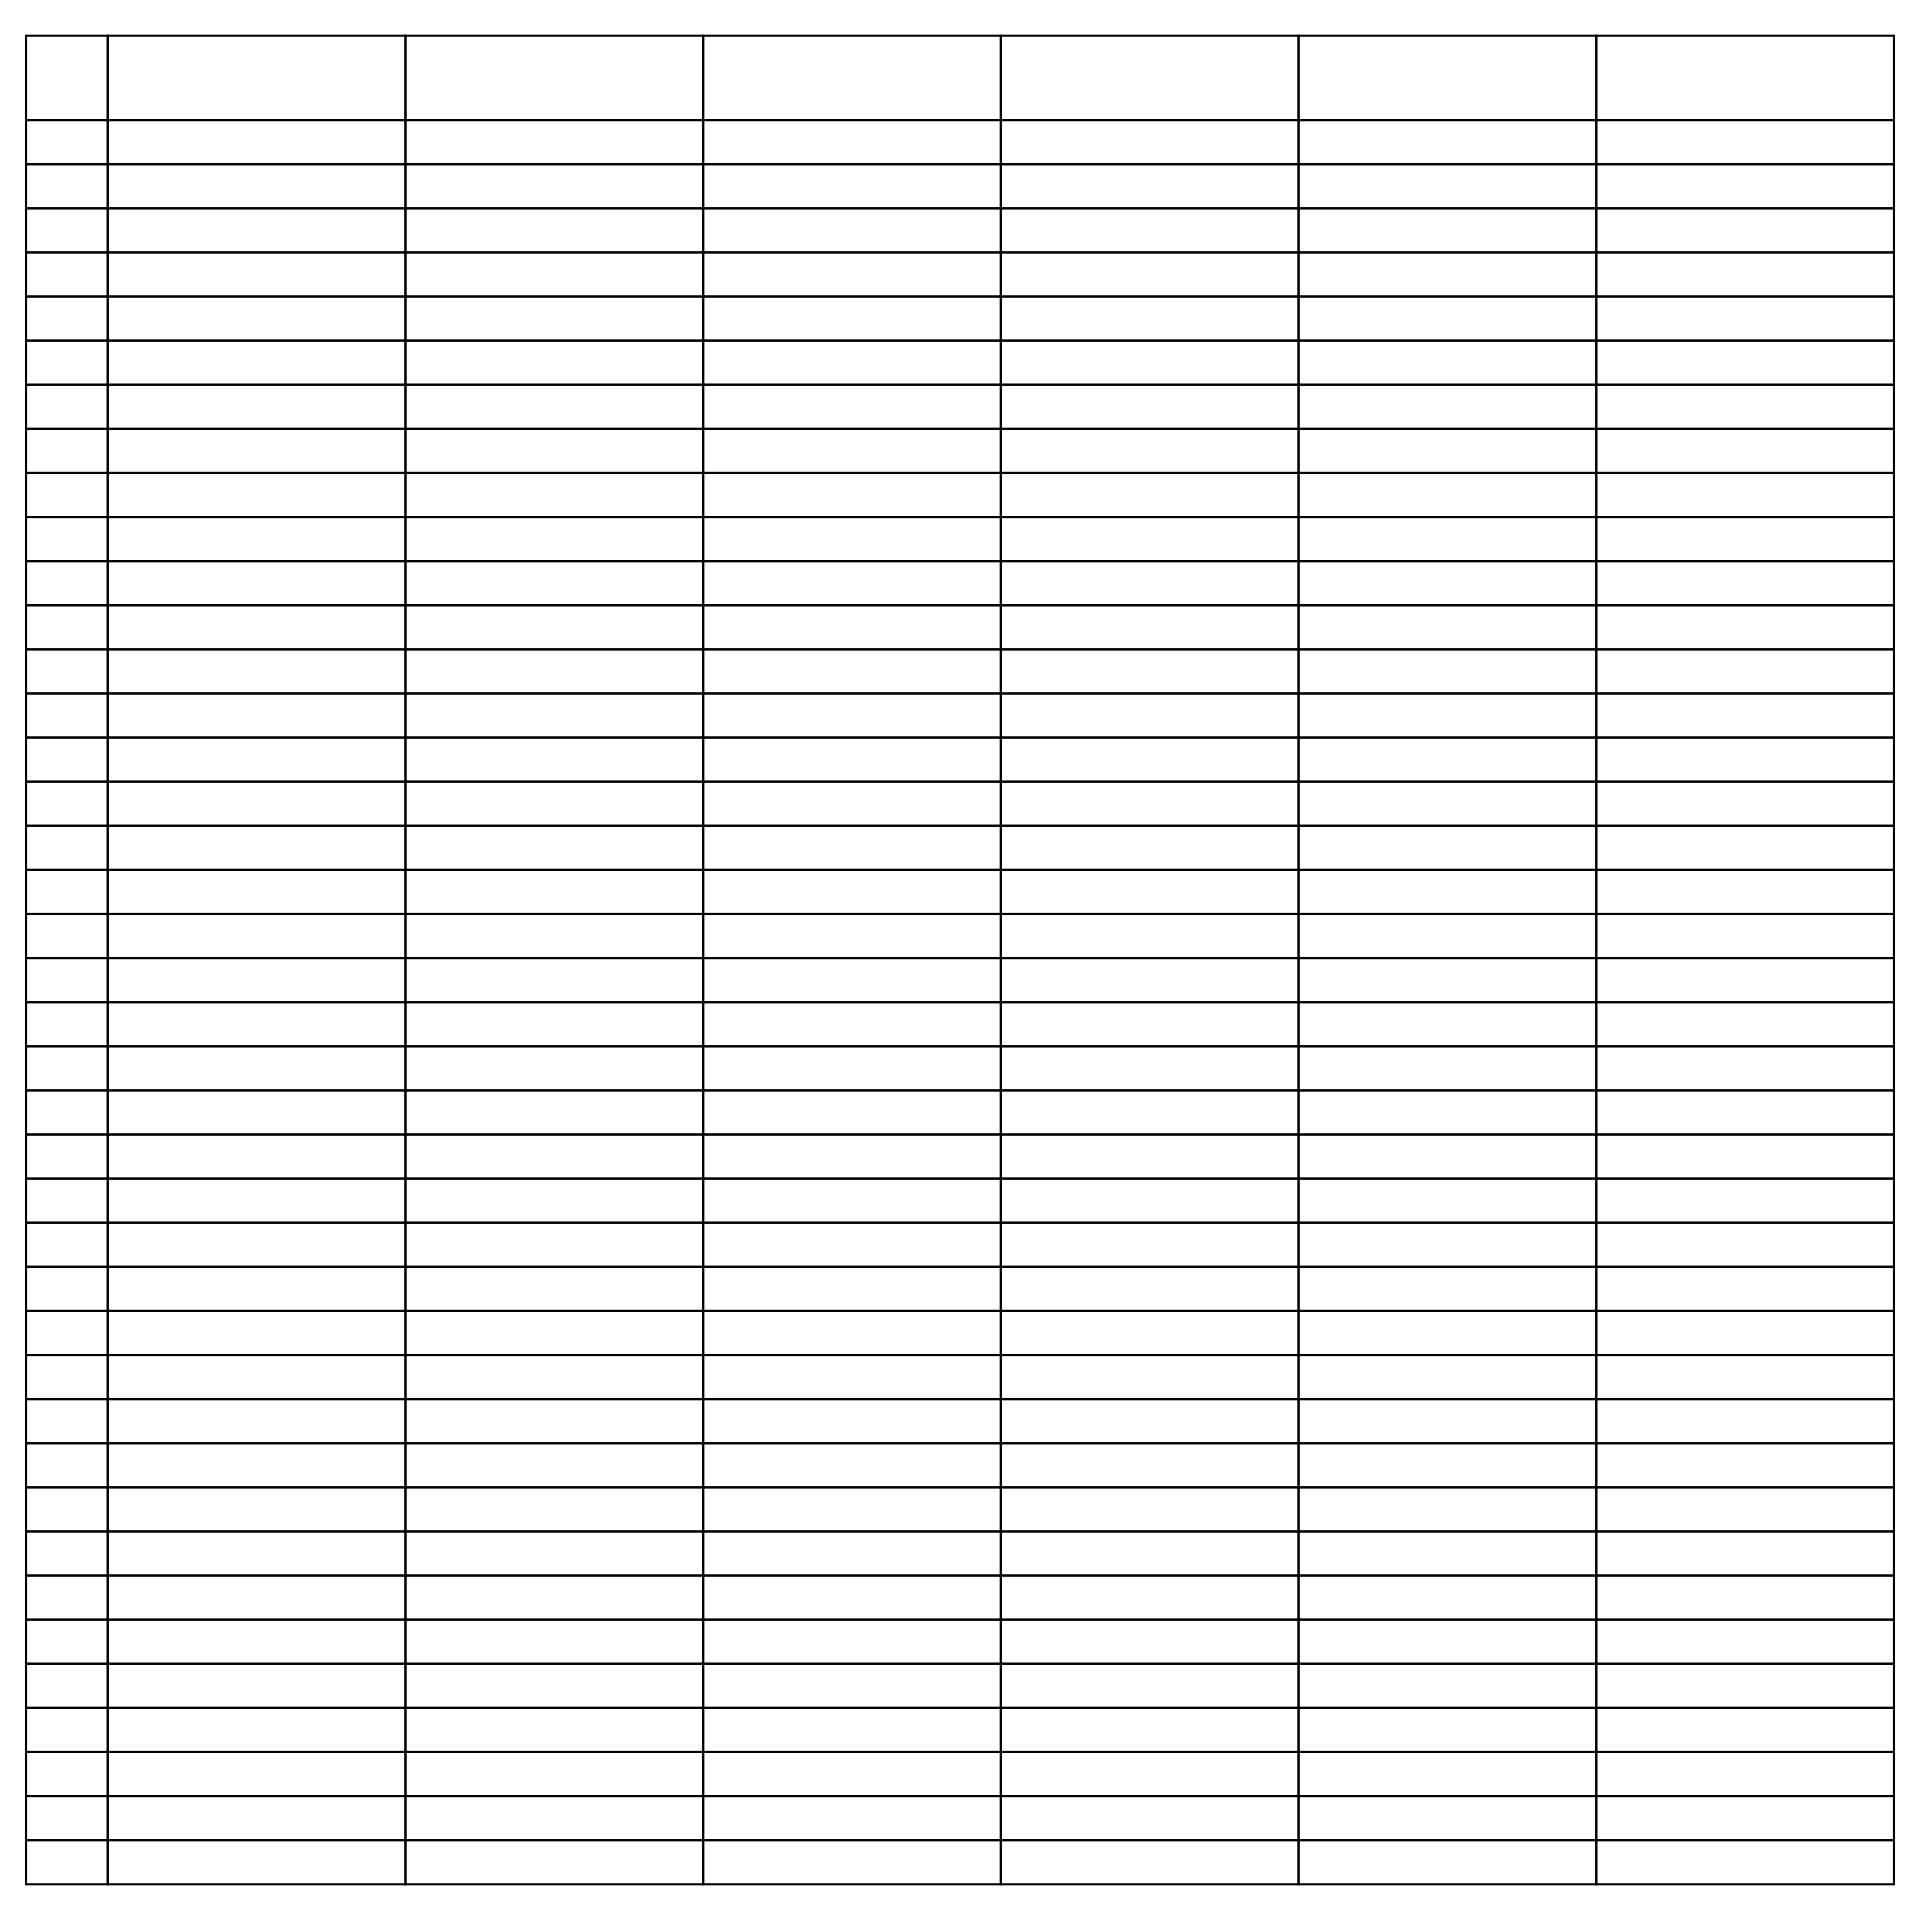 free blank spreadsheets to print - Music Search Engine at Search.com